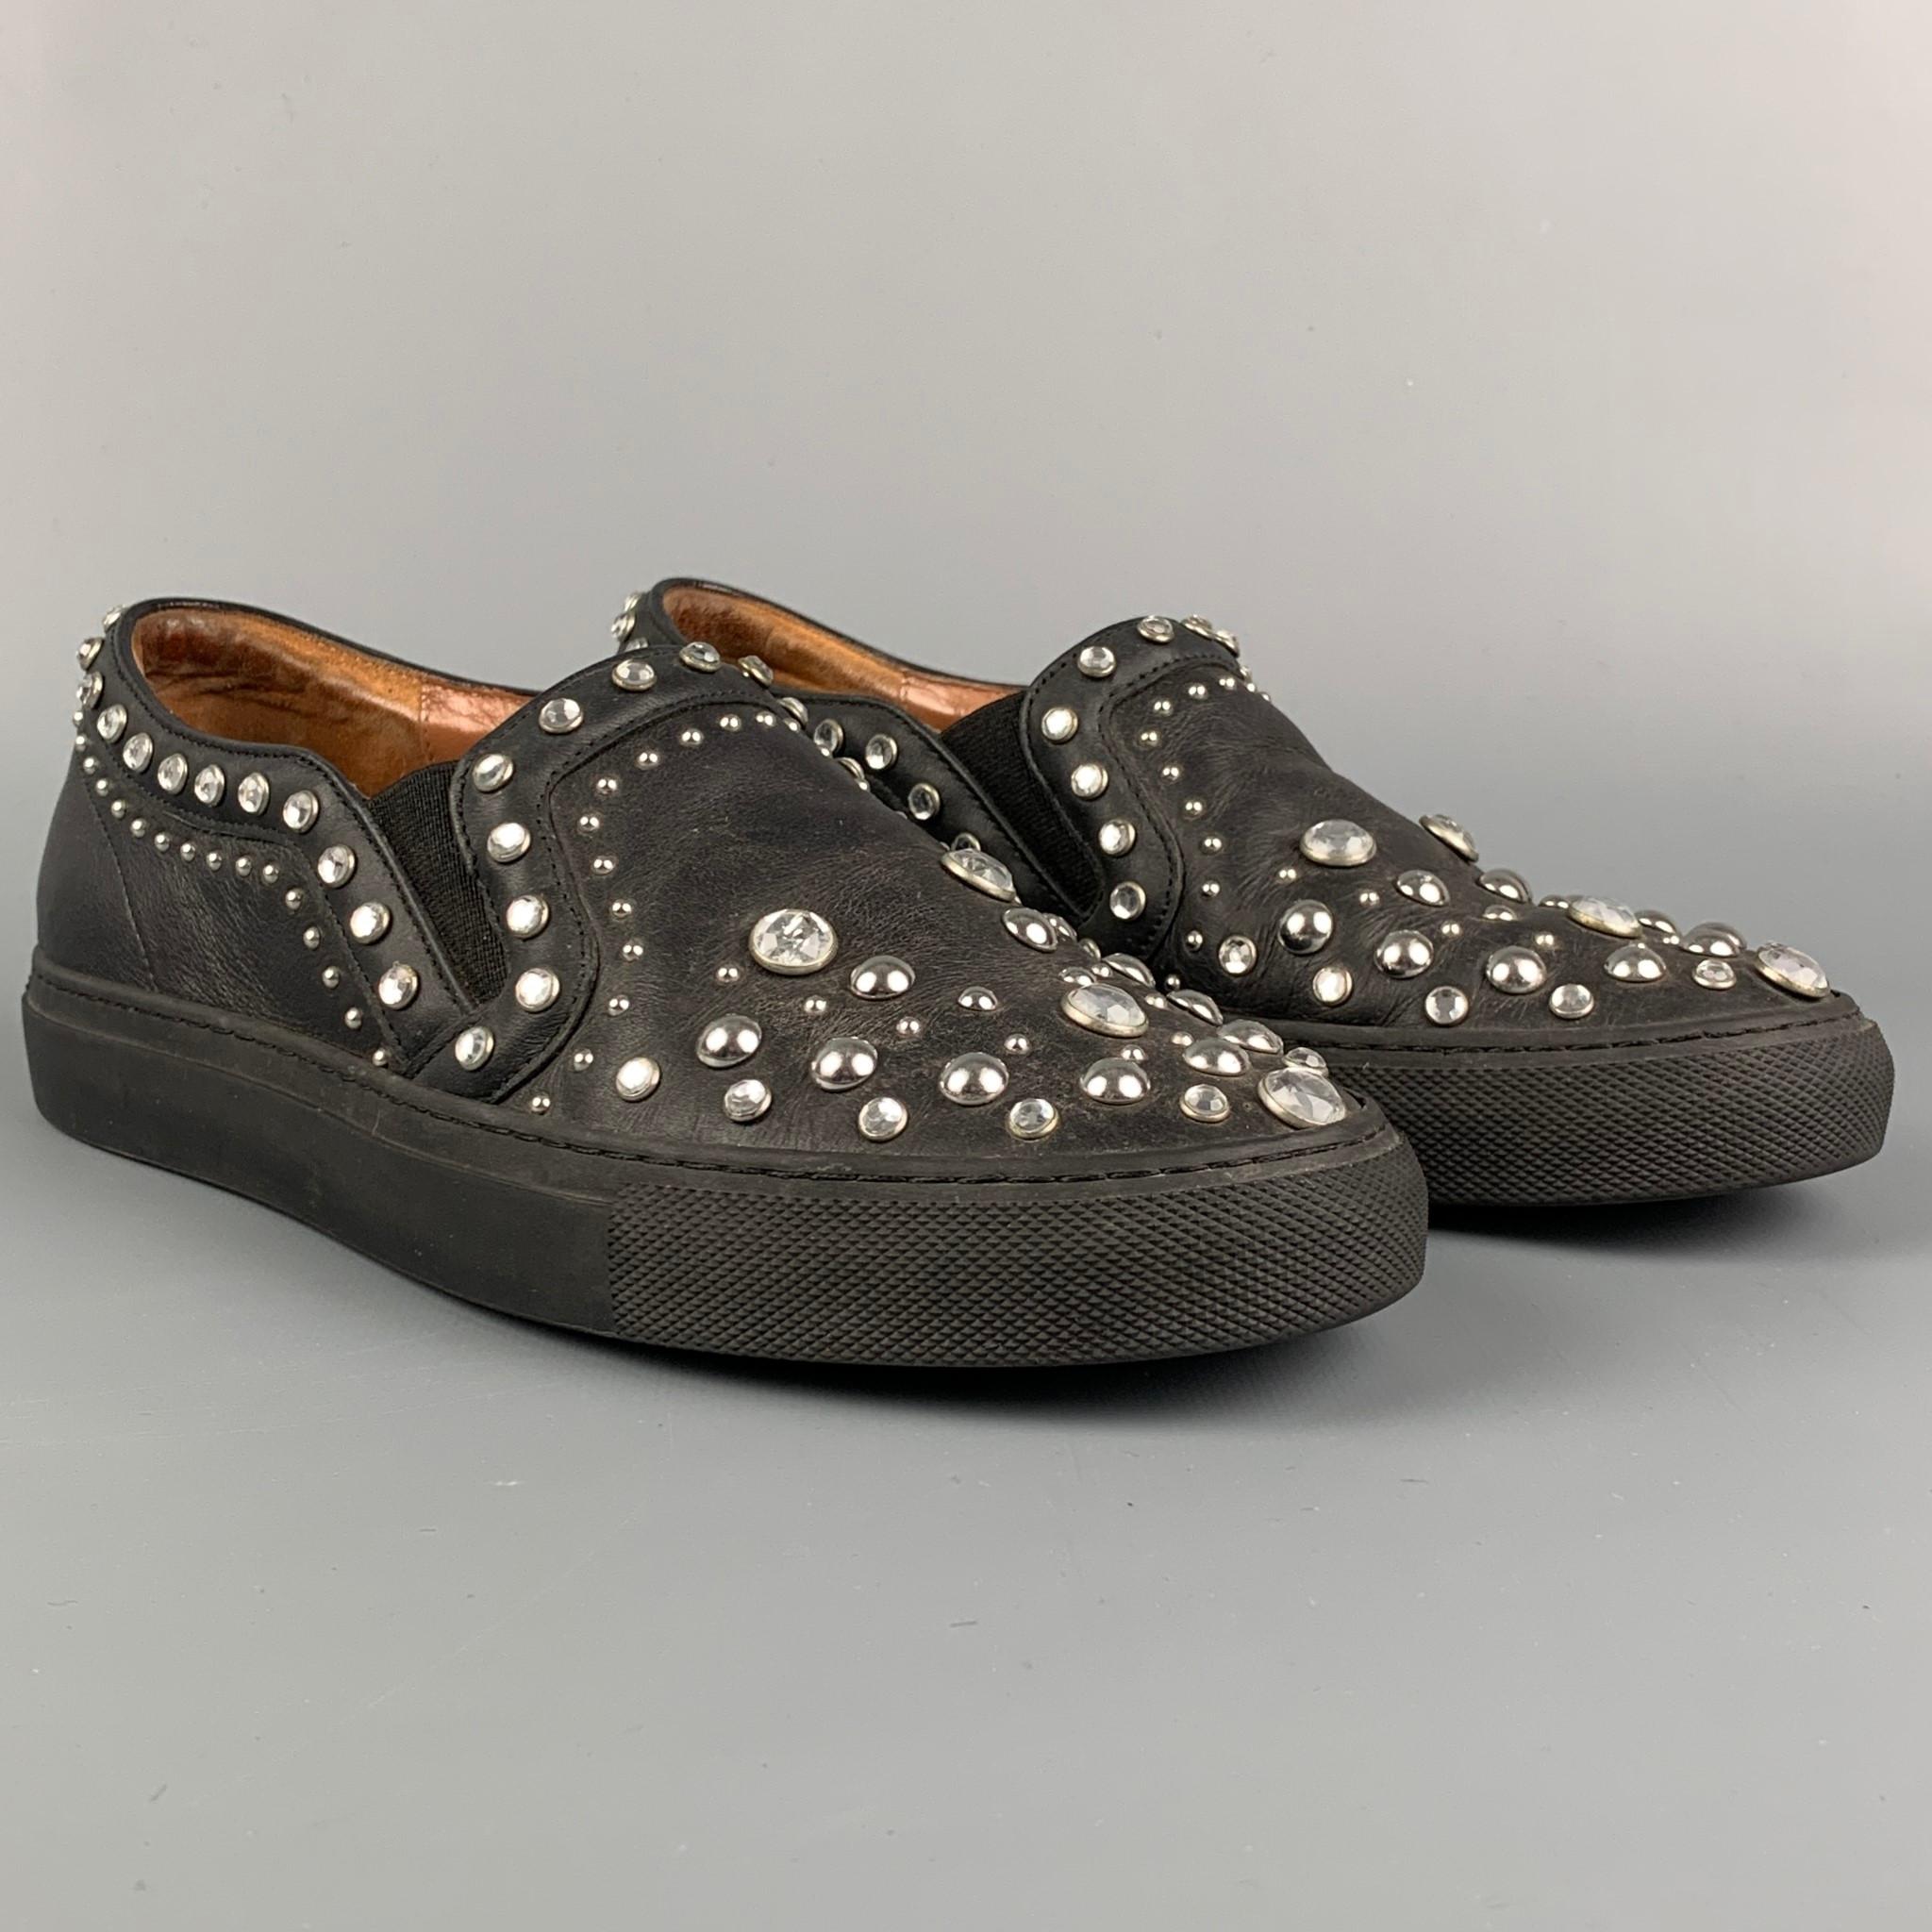 GIVENCHY sneakers comes in a black leather featuring studded details, rhinestones, slip on, and a rubber sole. Includes box. Made in Italy.

Good Pre-Owned Condition.
Marked: 37
Original Retail Price: $650.00

Outsole: 10.25 in. x 3.75 in. 